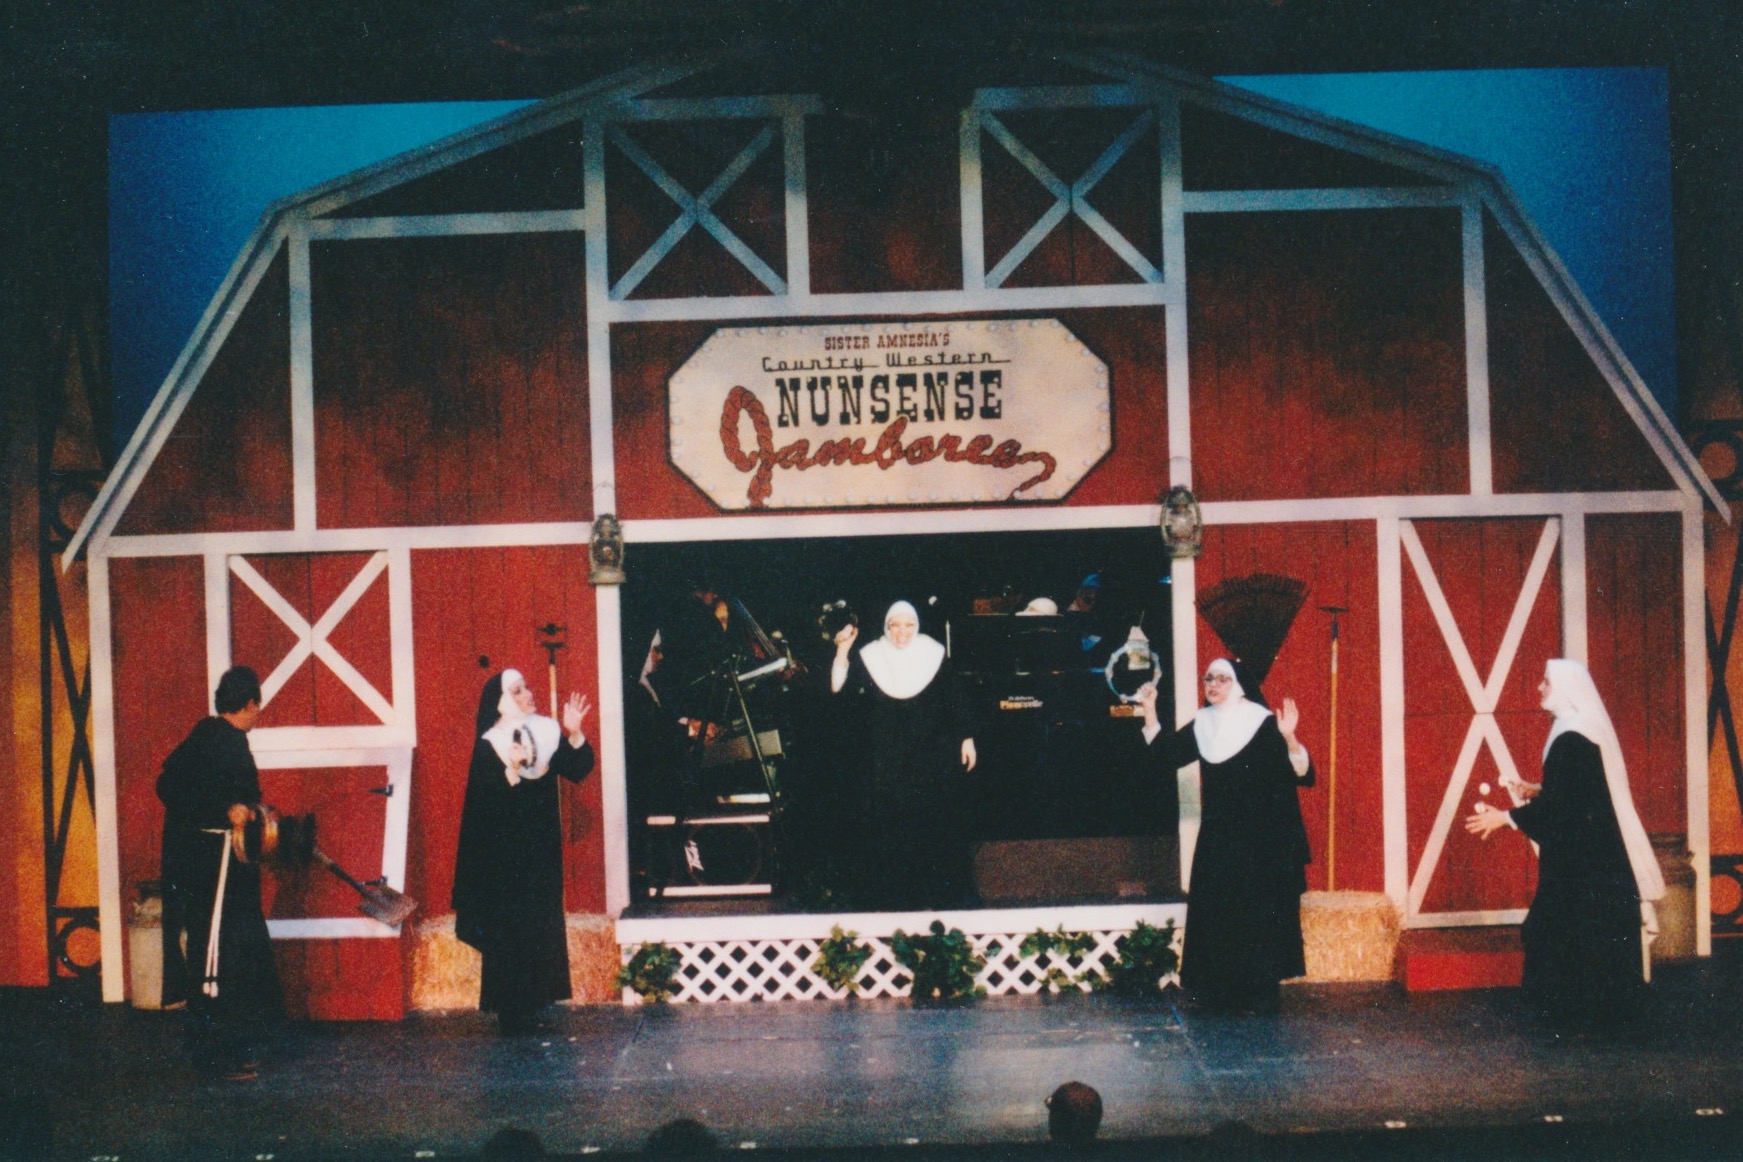 The Cast of The UTEP Dinner Theatre production of Nunsense III - The Jamboree